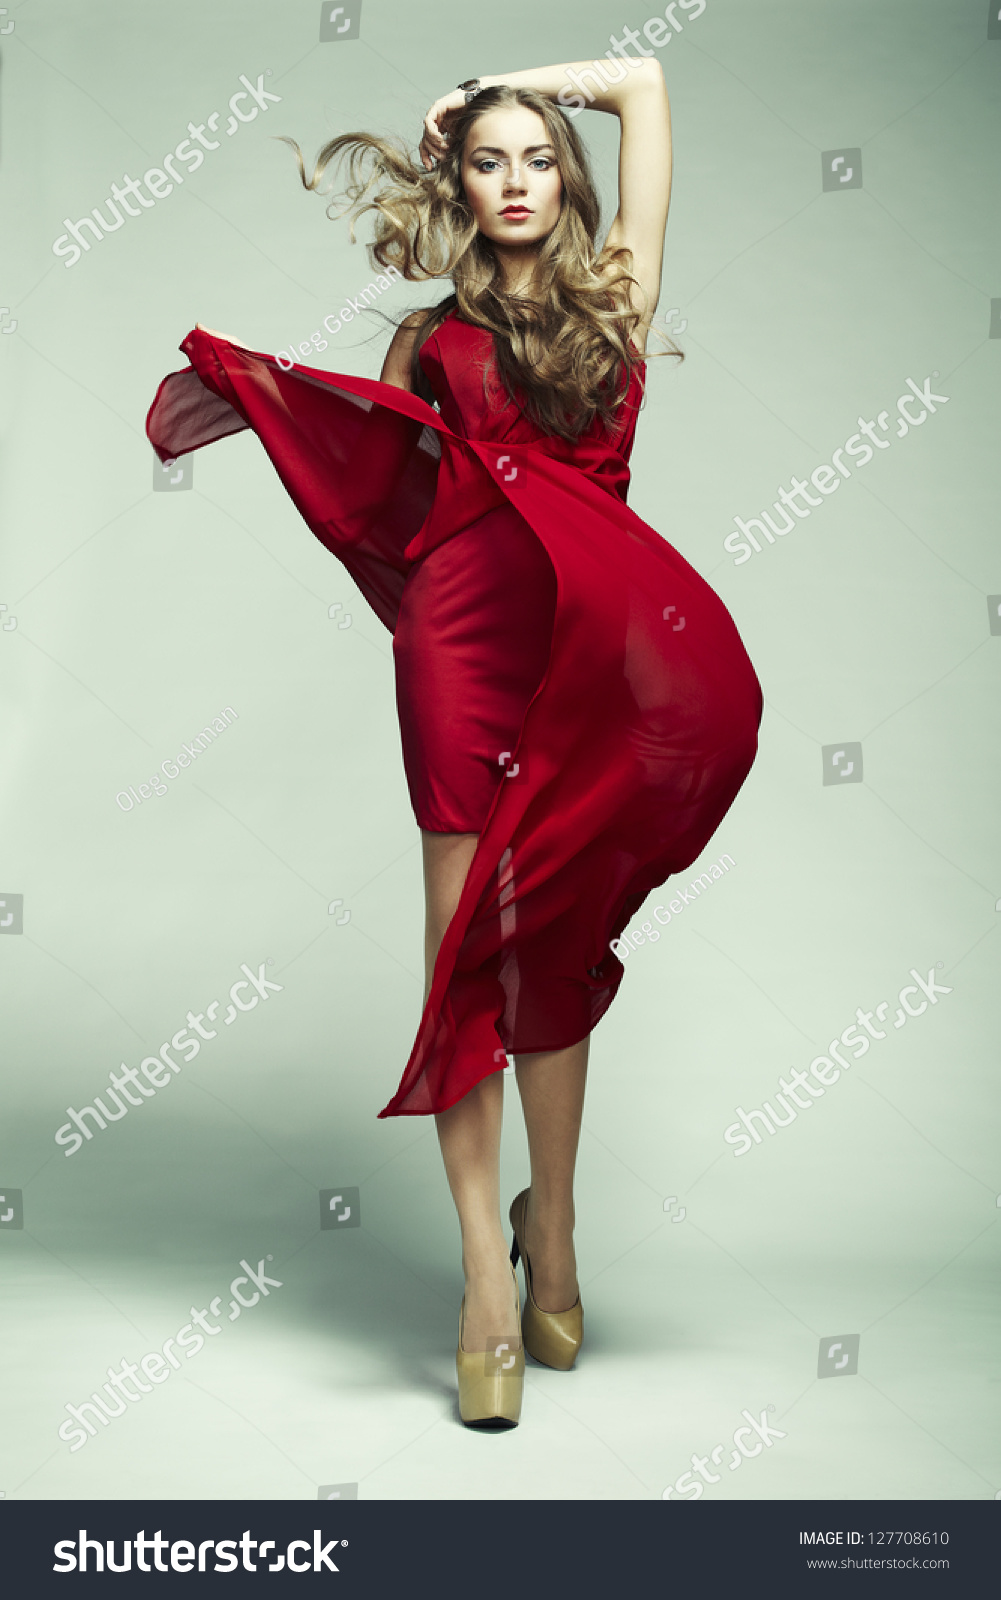  Fashion  Photo  Young Magnificent Woman Red Stock Photo  